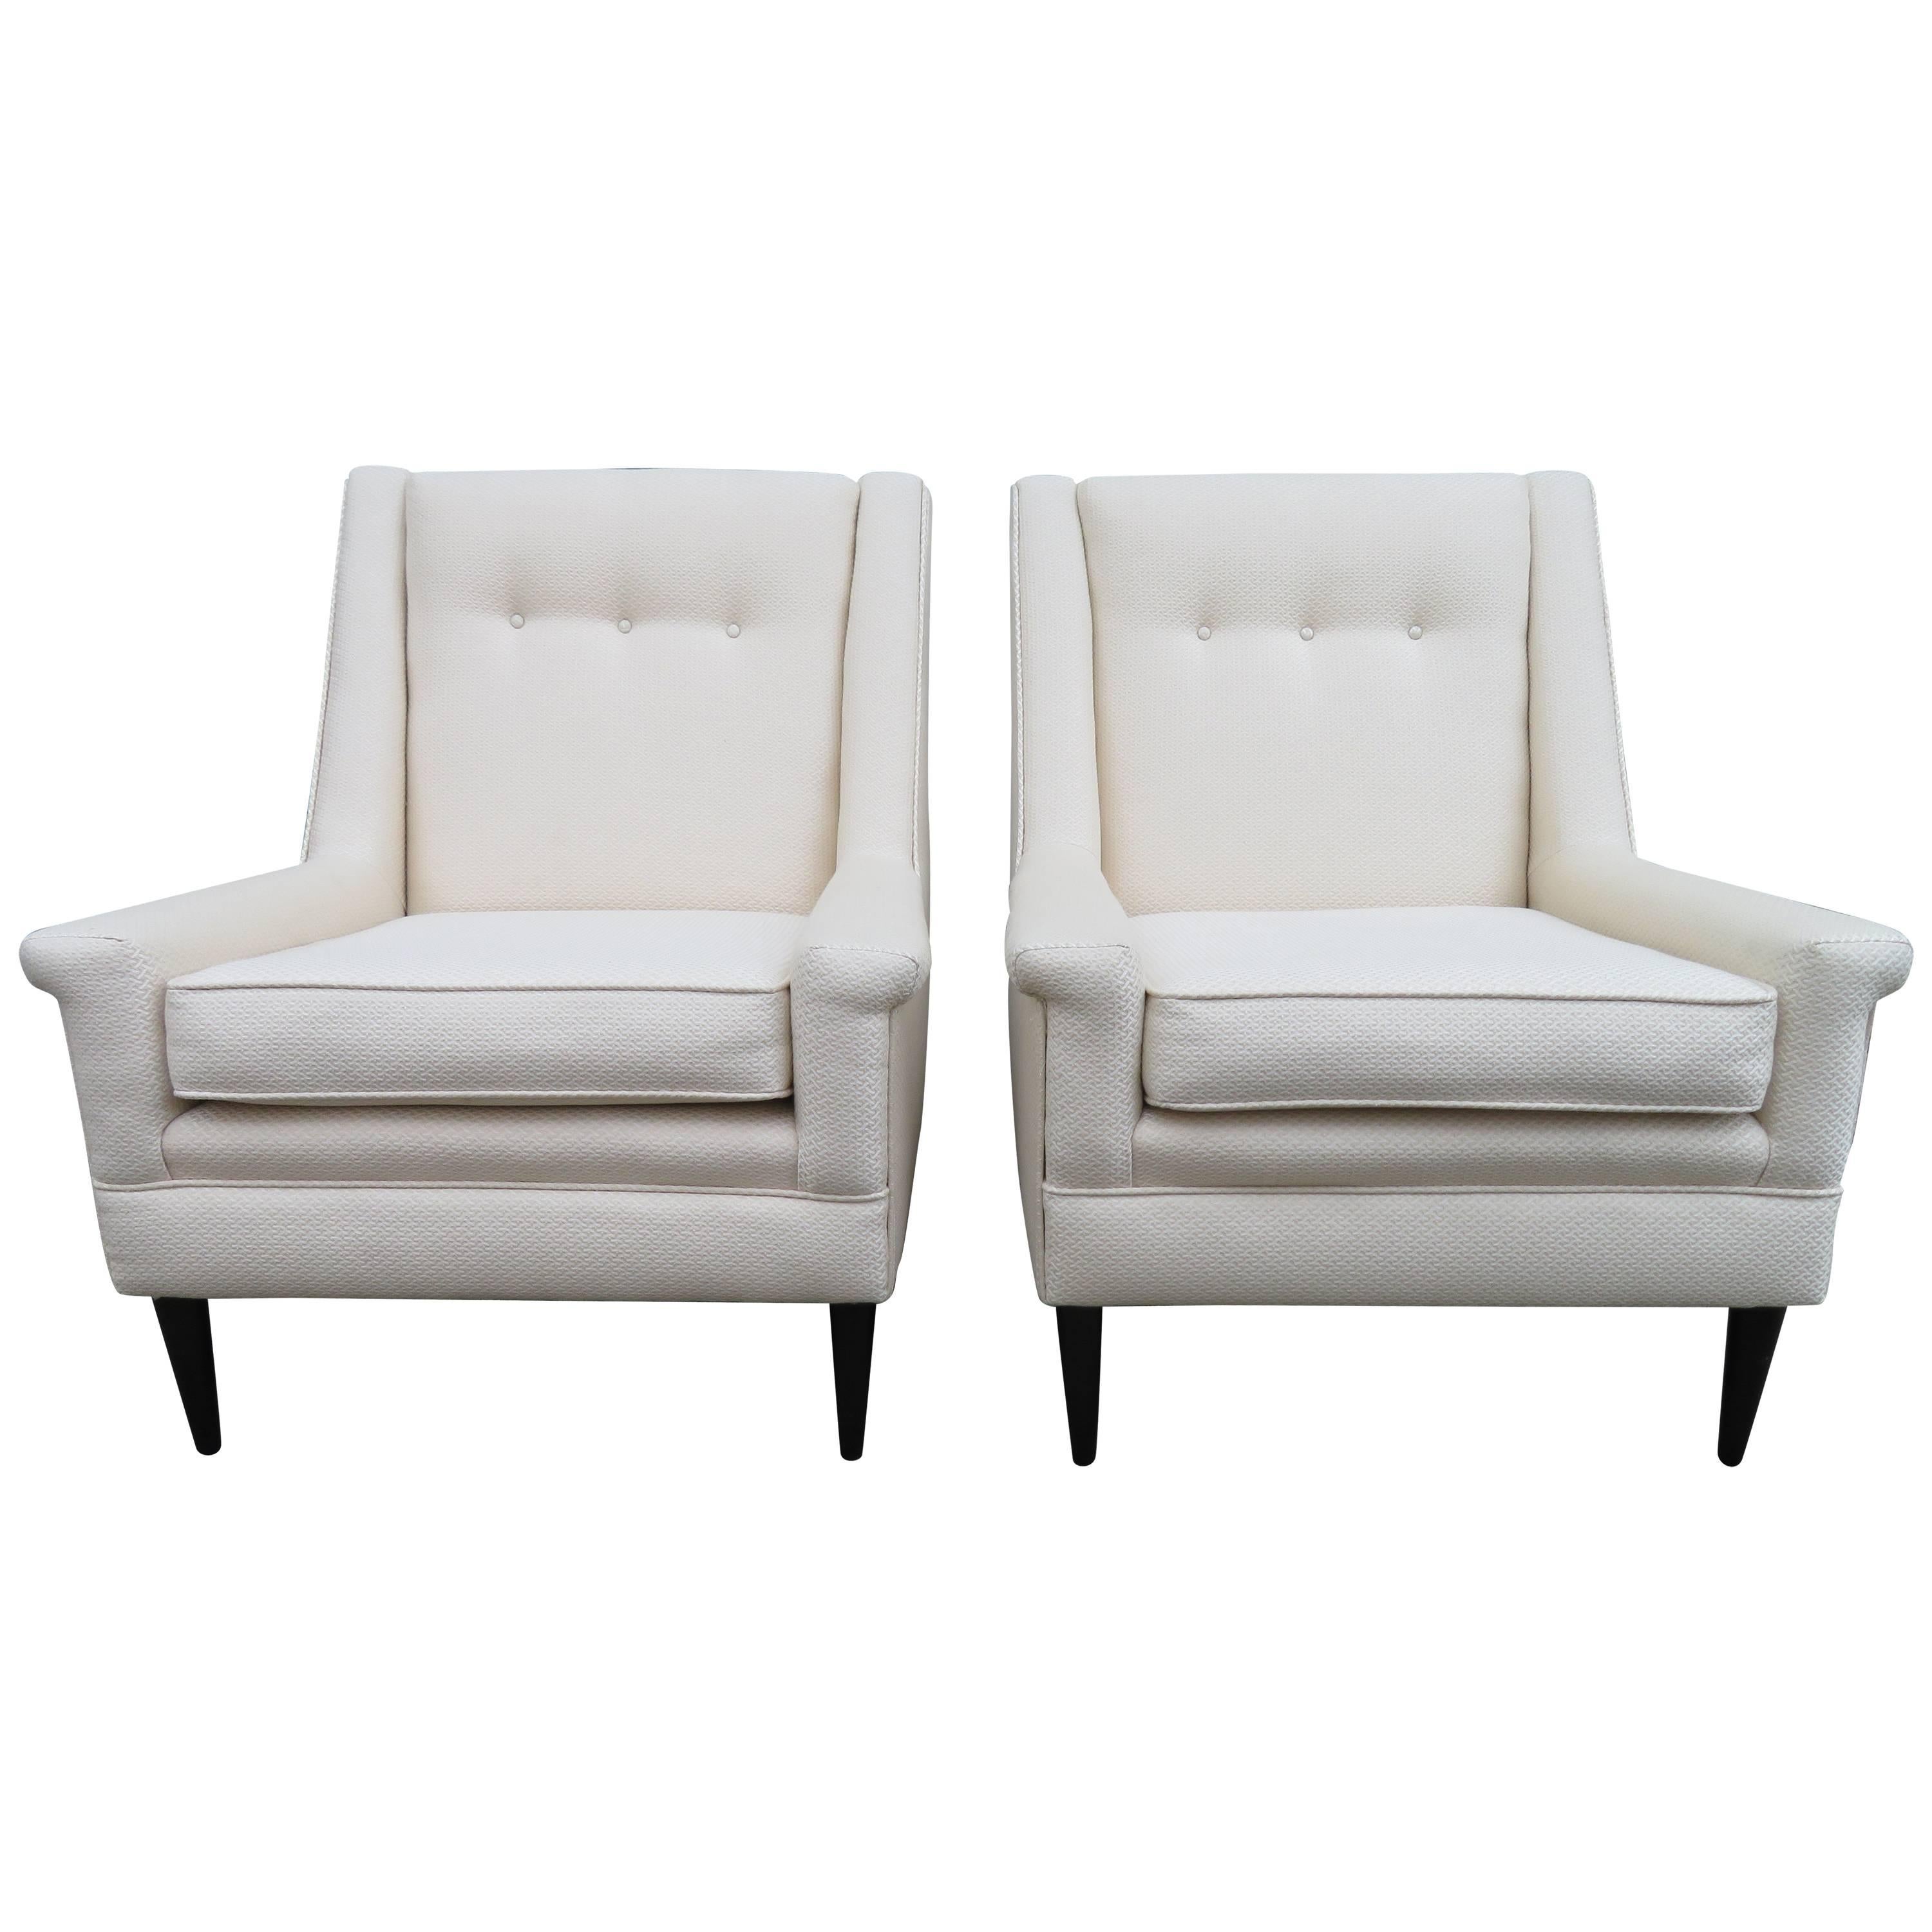 Gorgeous Pair of Harvey Probber Style Lounge Chairs, Mid-Century Modern For Sale